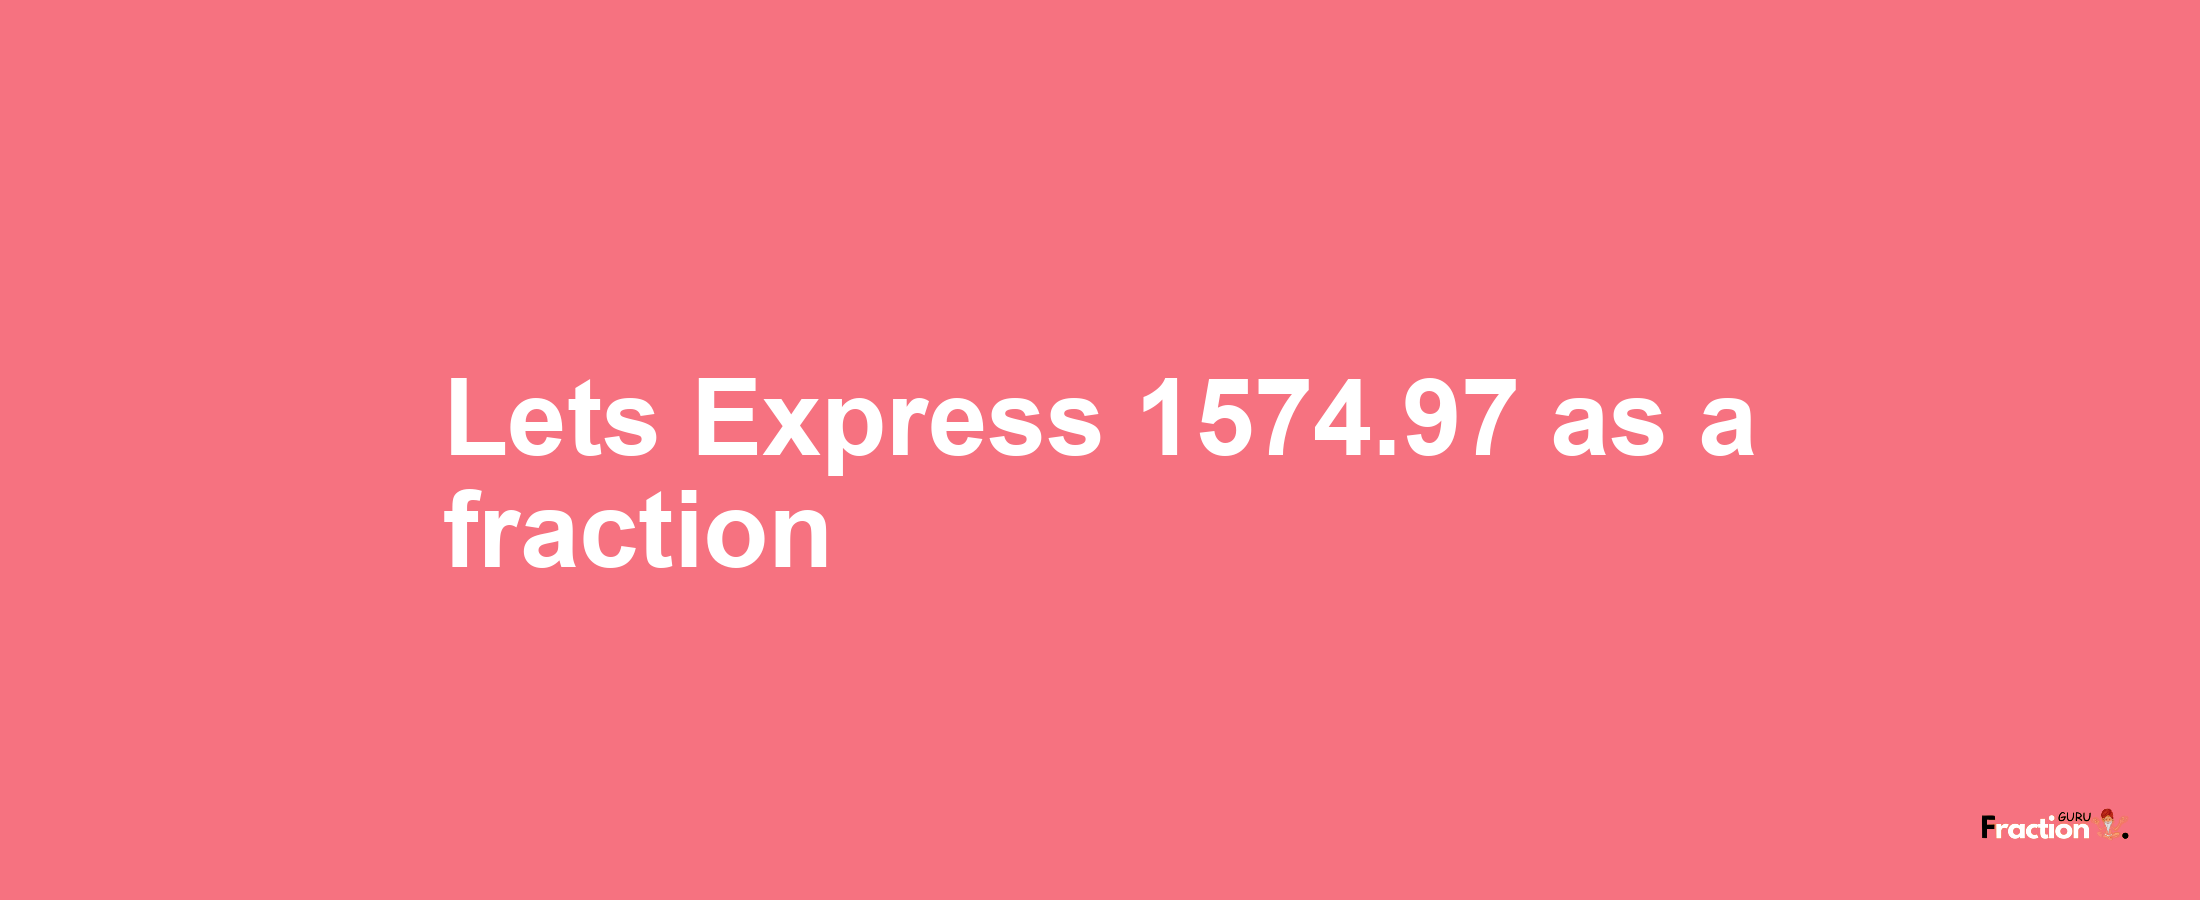 Lets Express 1574.97 as afraction